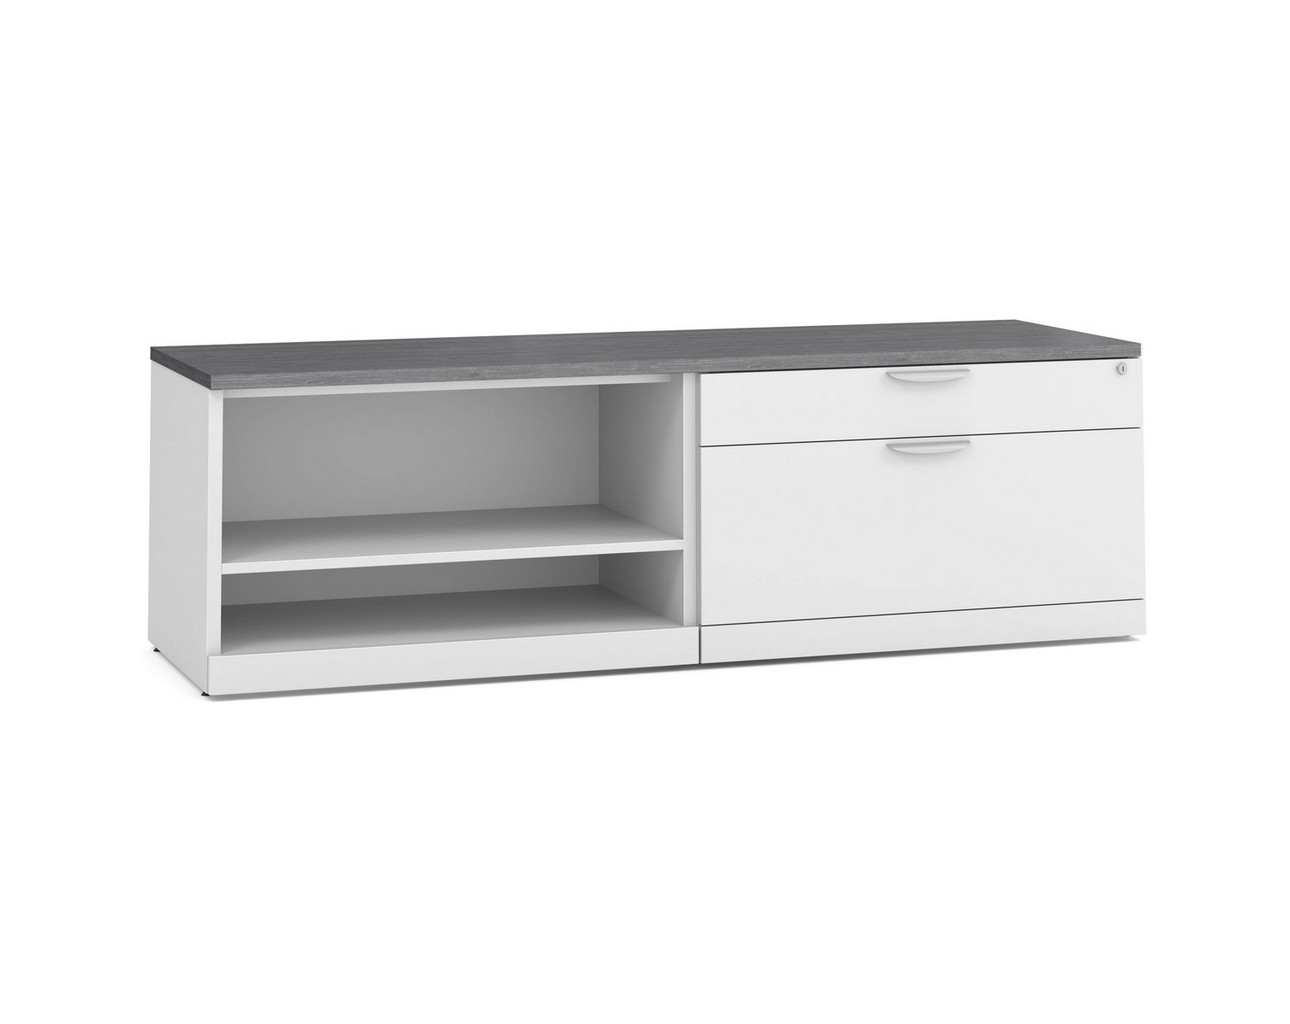 Elements Storage Cabinet and Bookshelf Credenza – WHT Base and NPG Top